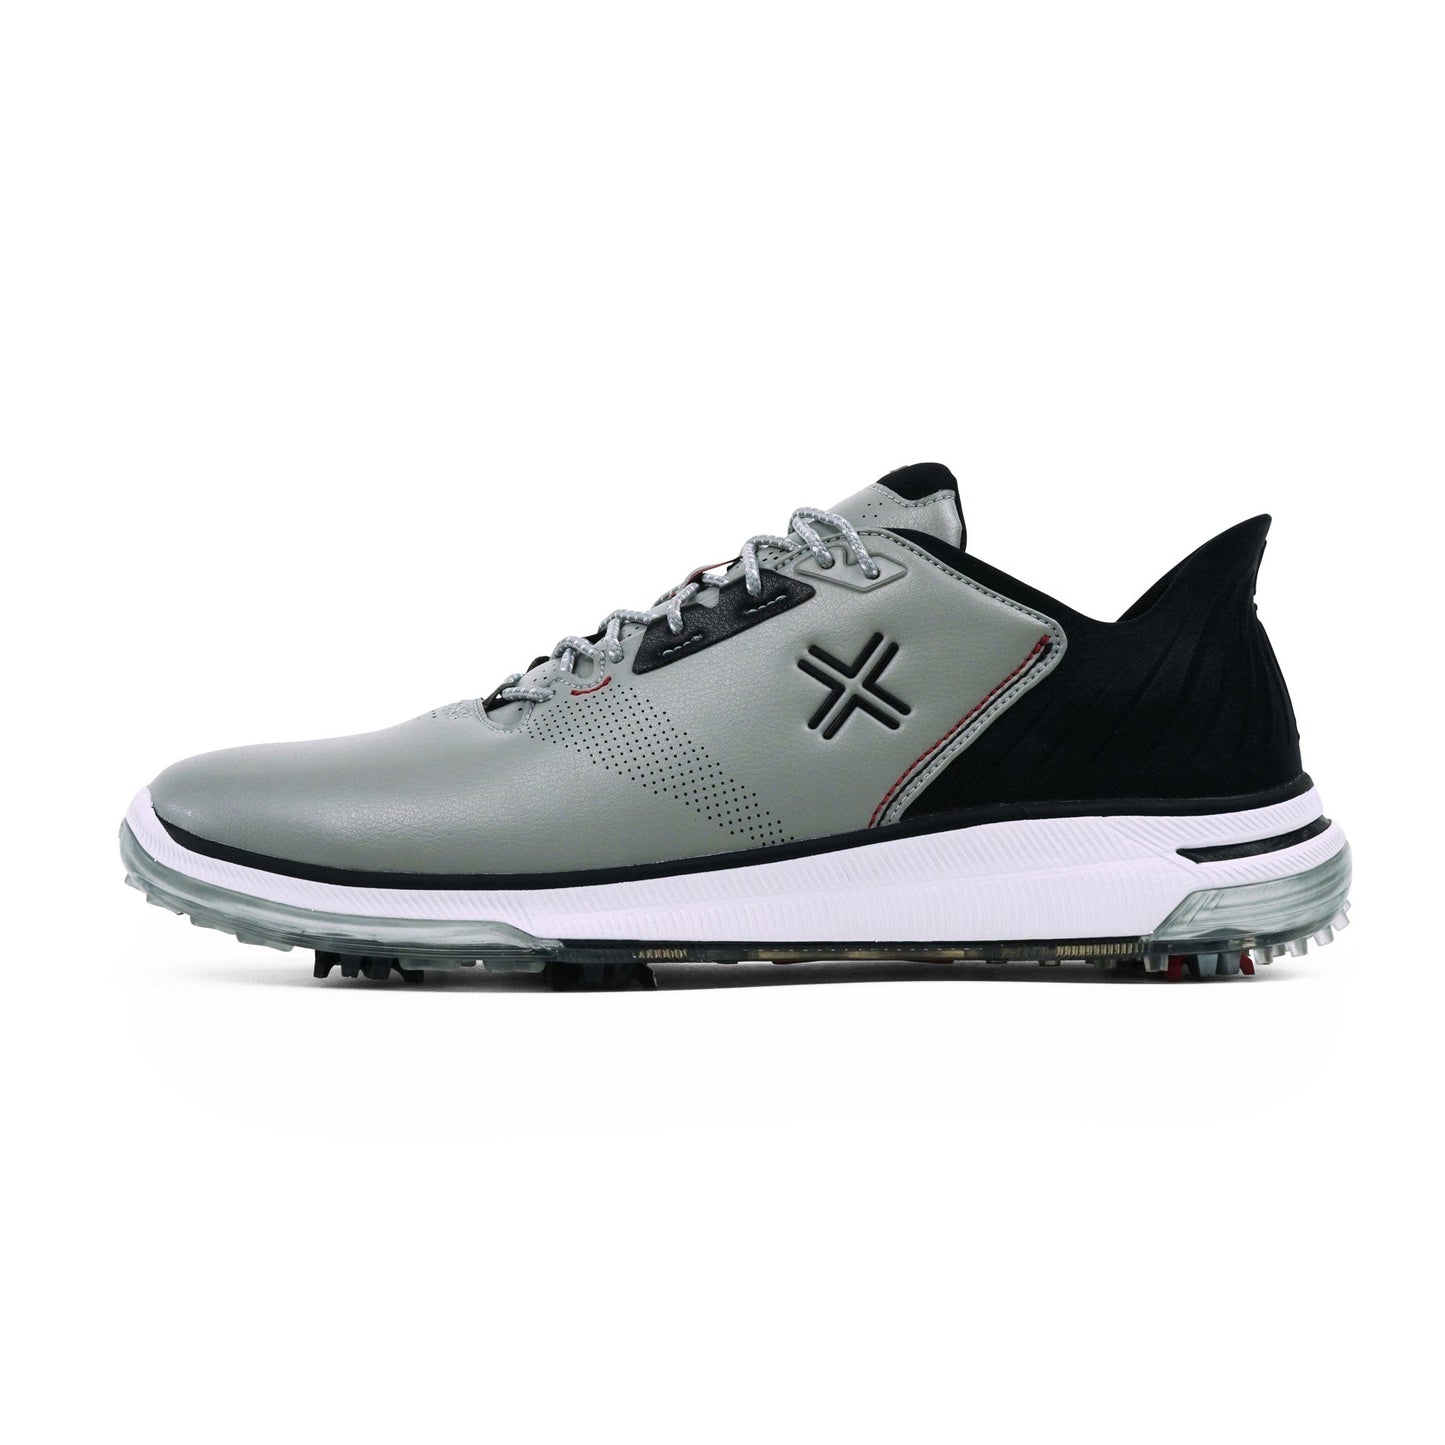 PAYNTR X 004 RS Spiked Golf Shoes